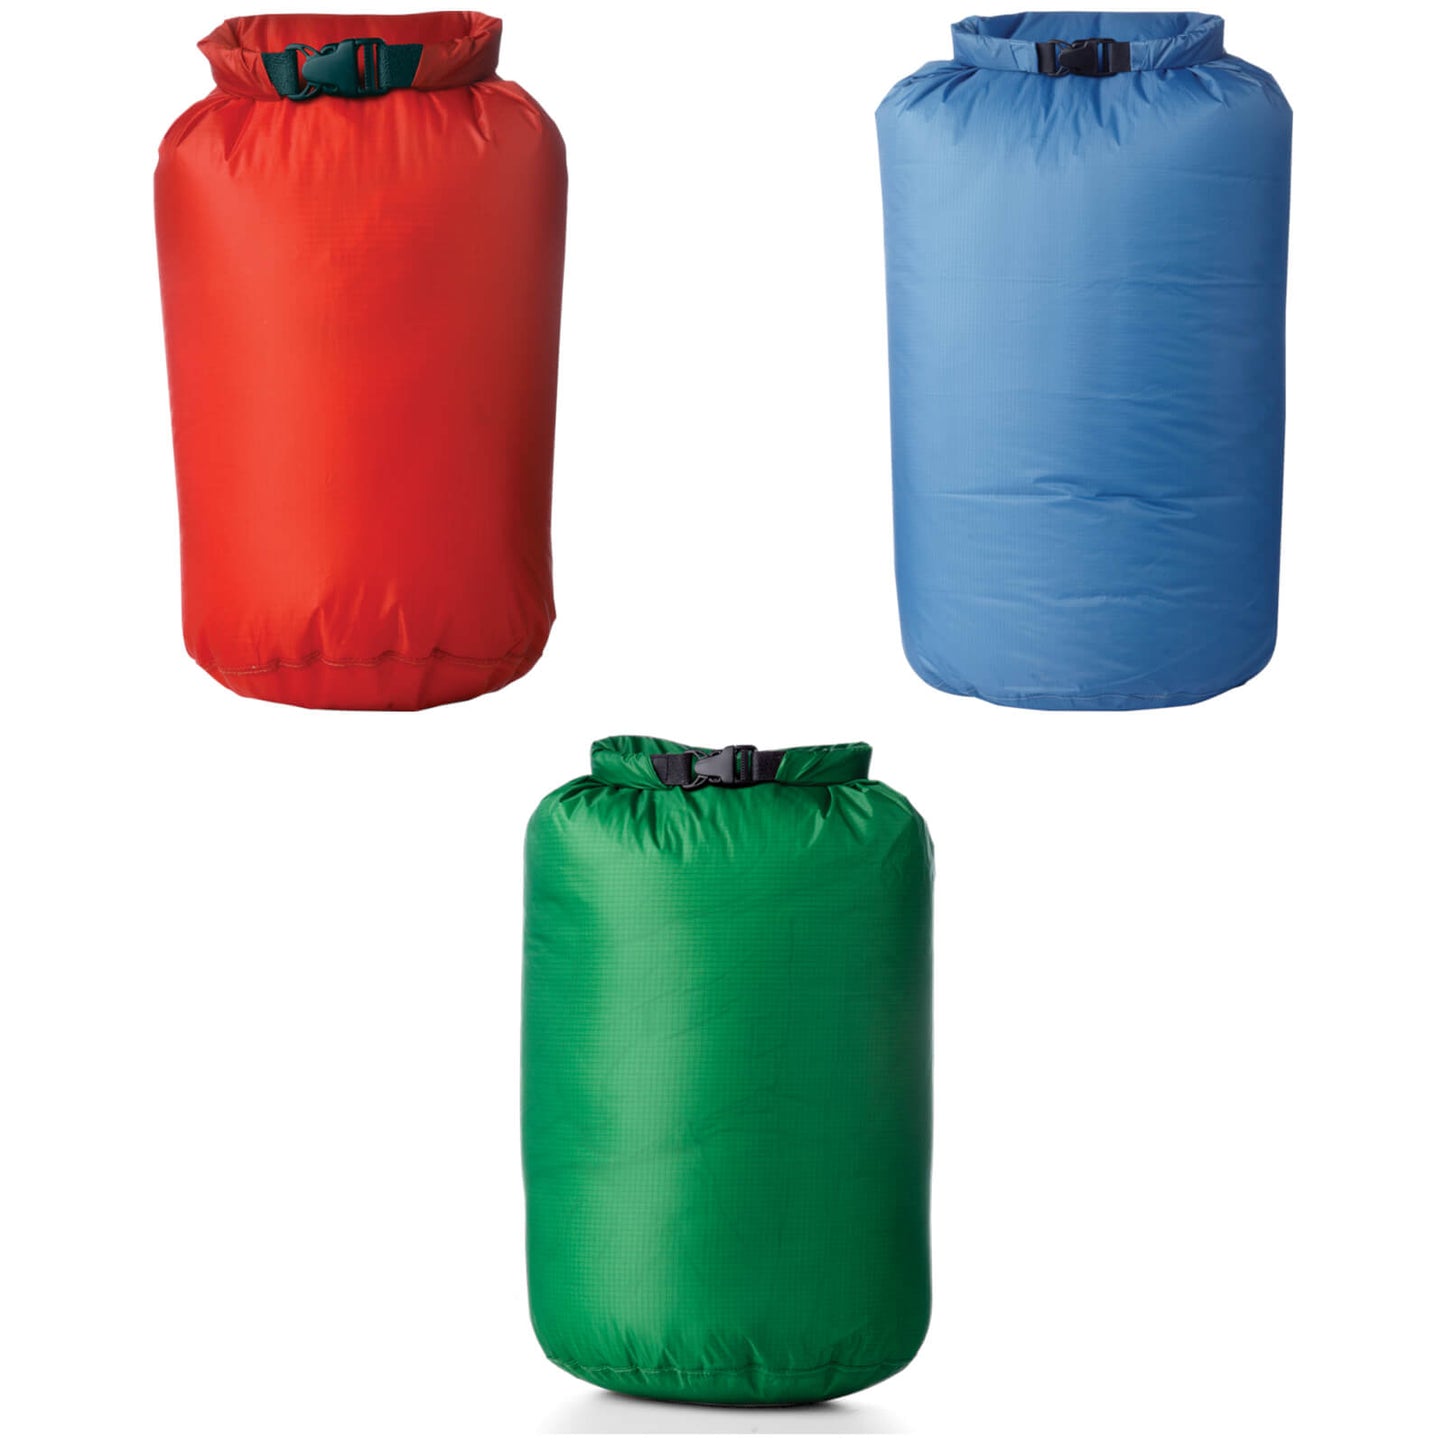 Coghlan's Lightweight Dry Bag Waterproof Dry Bag Collection